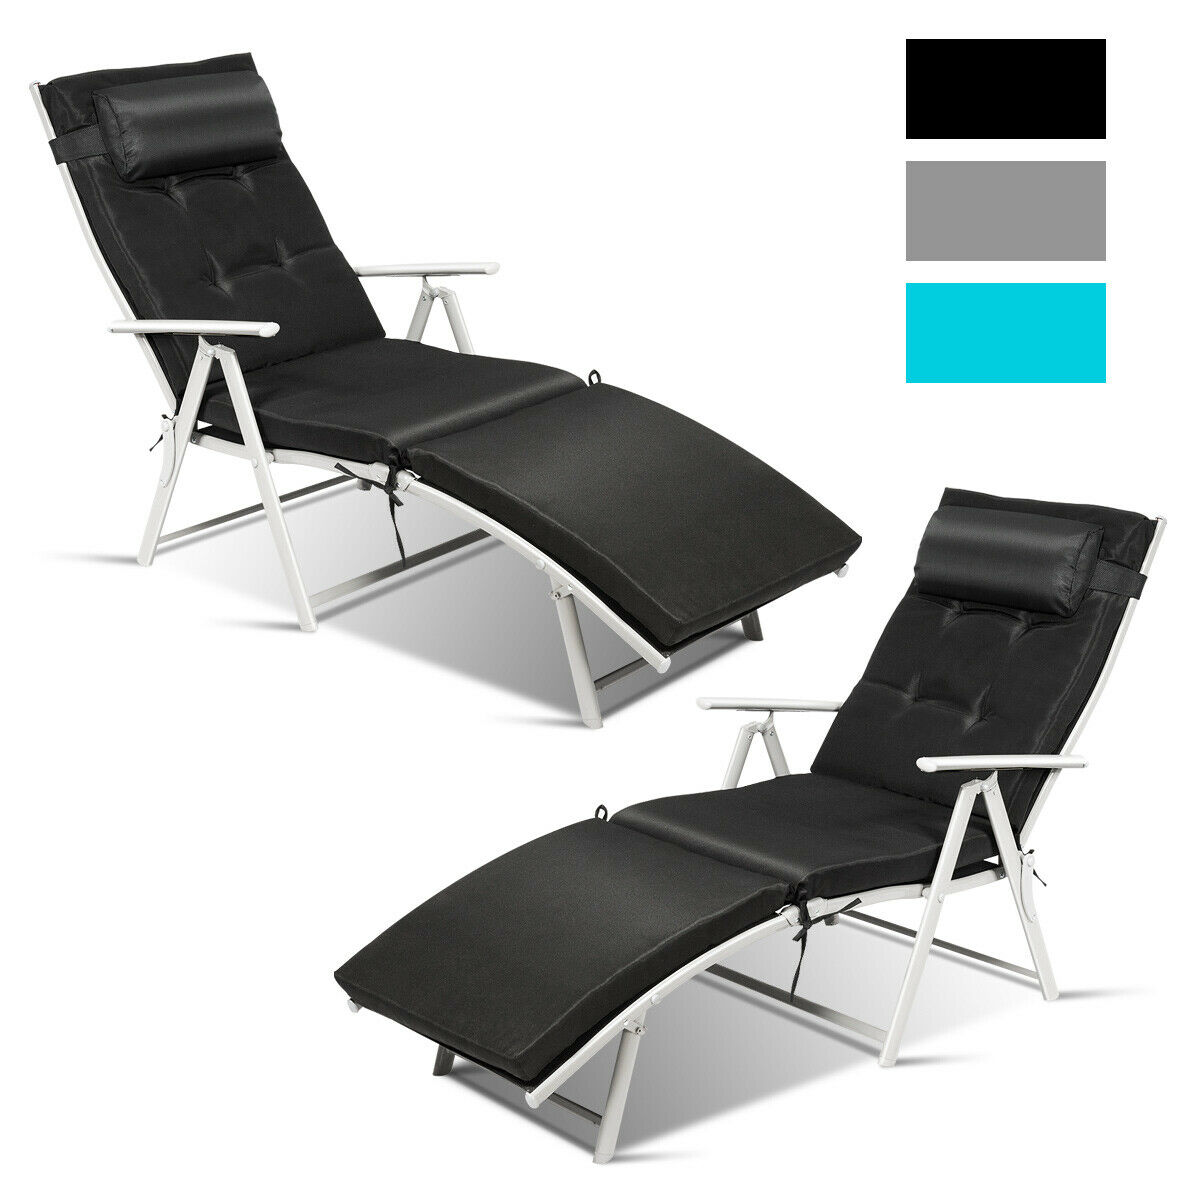 Outdoor Folding Chaise Lounge Chair Lightweight Recliner w/Cushion Black